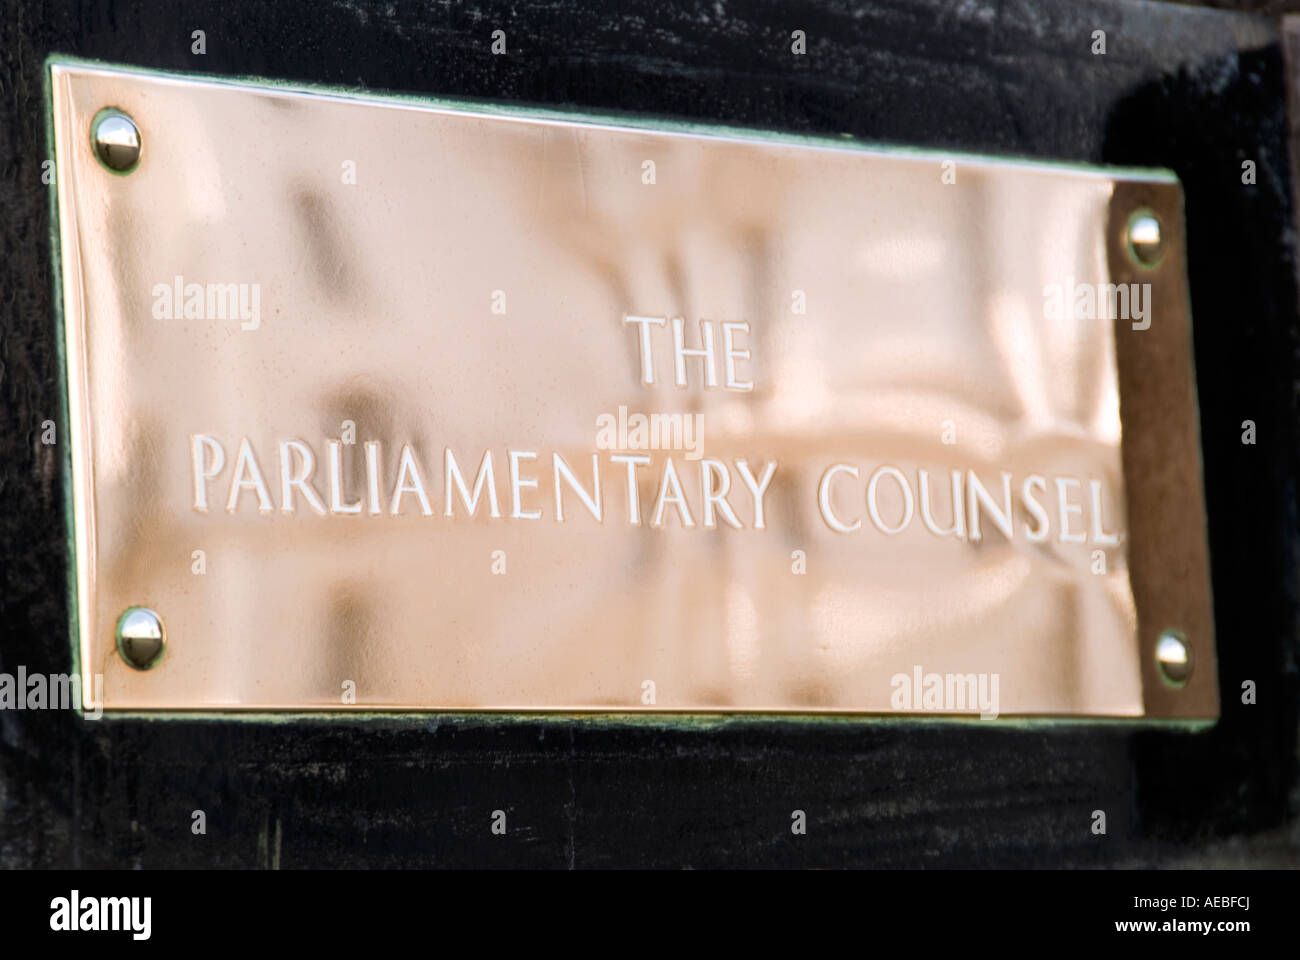 Brass name plaque of The Parliamentary Counsel government office in Whitehall Central London UK Stock Photo